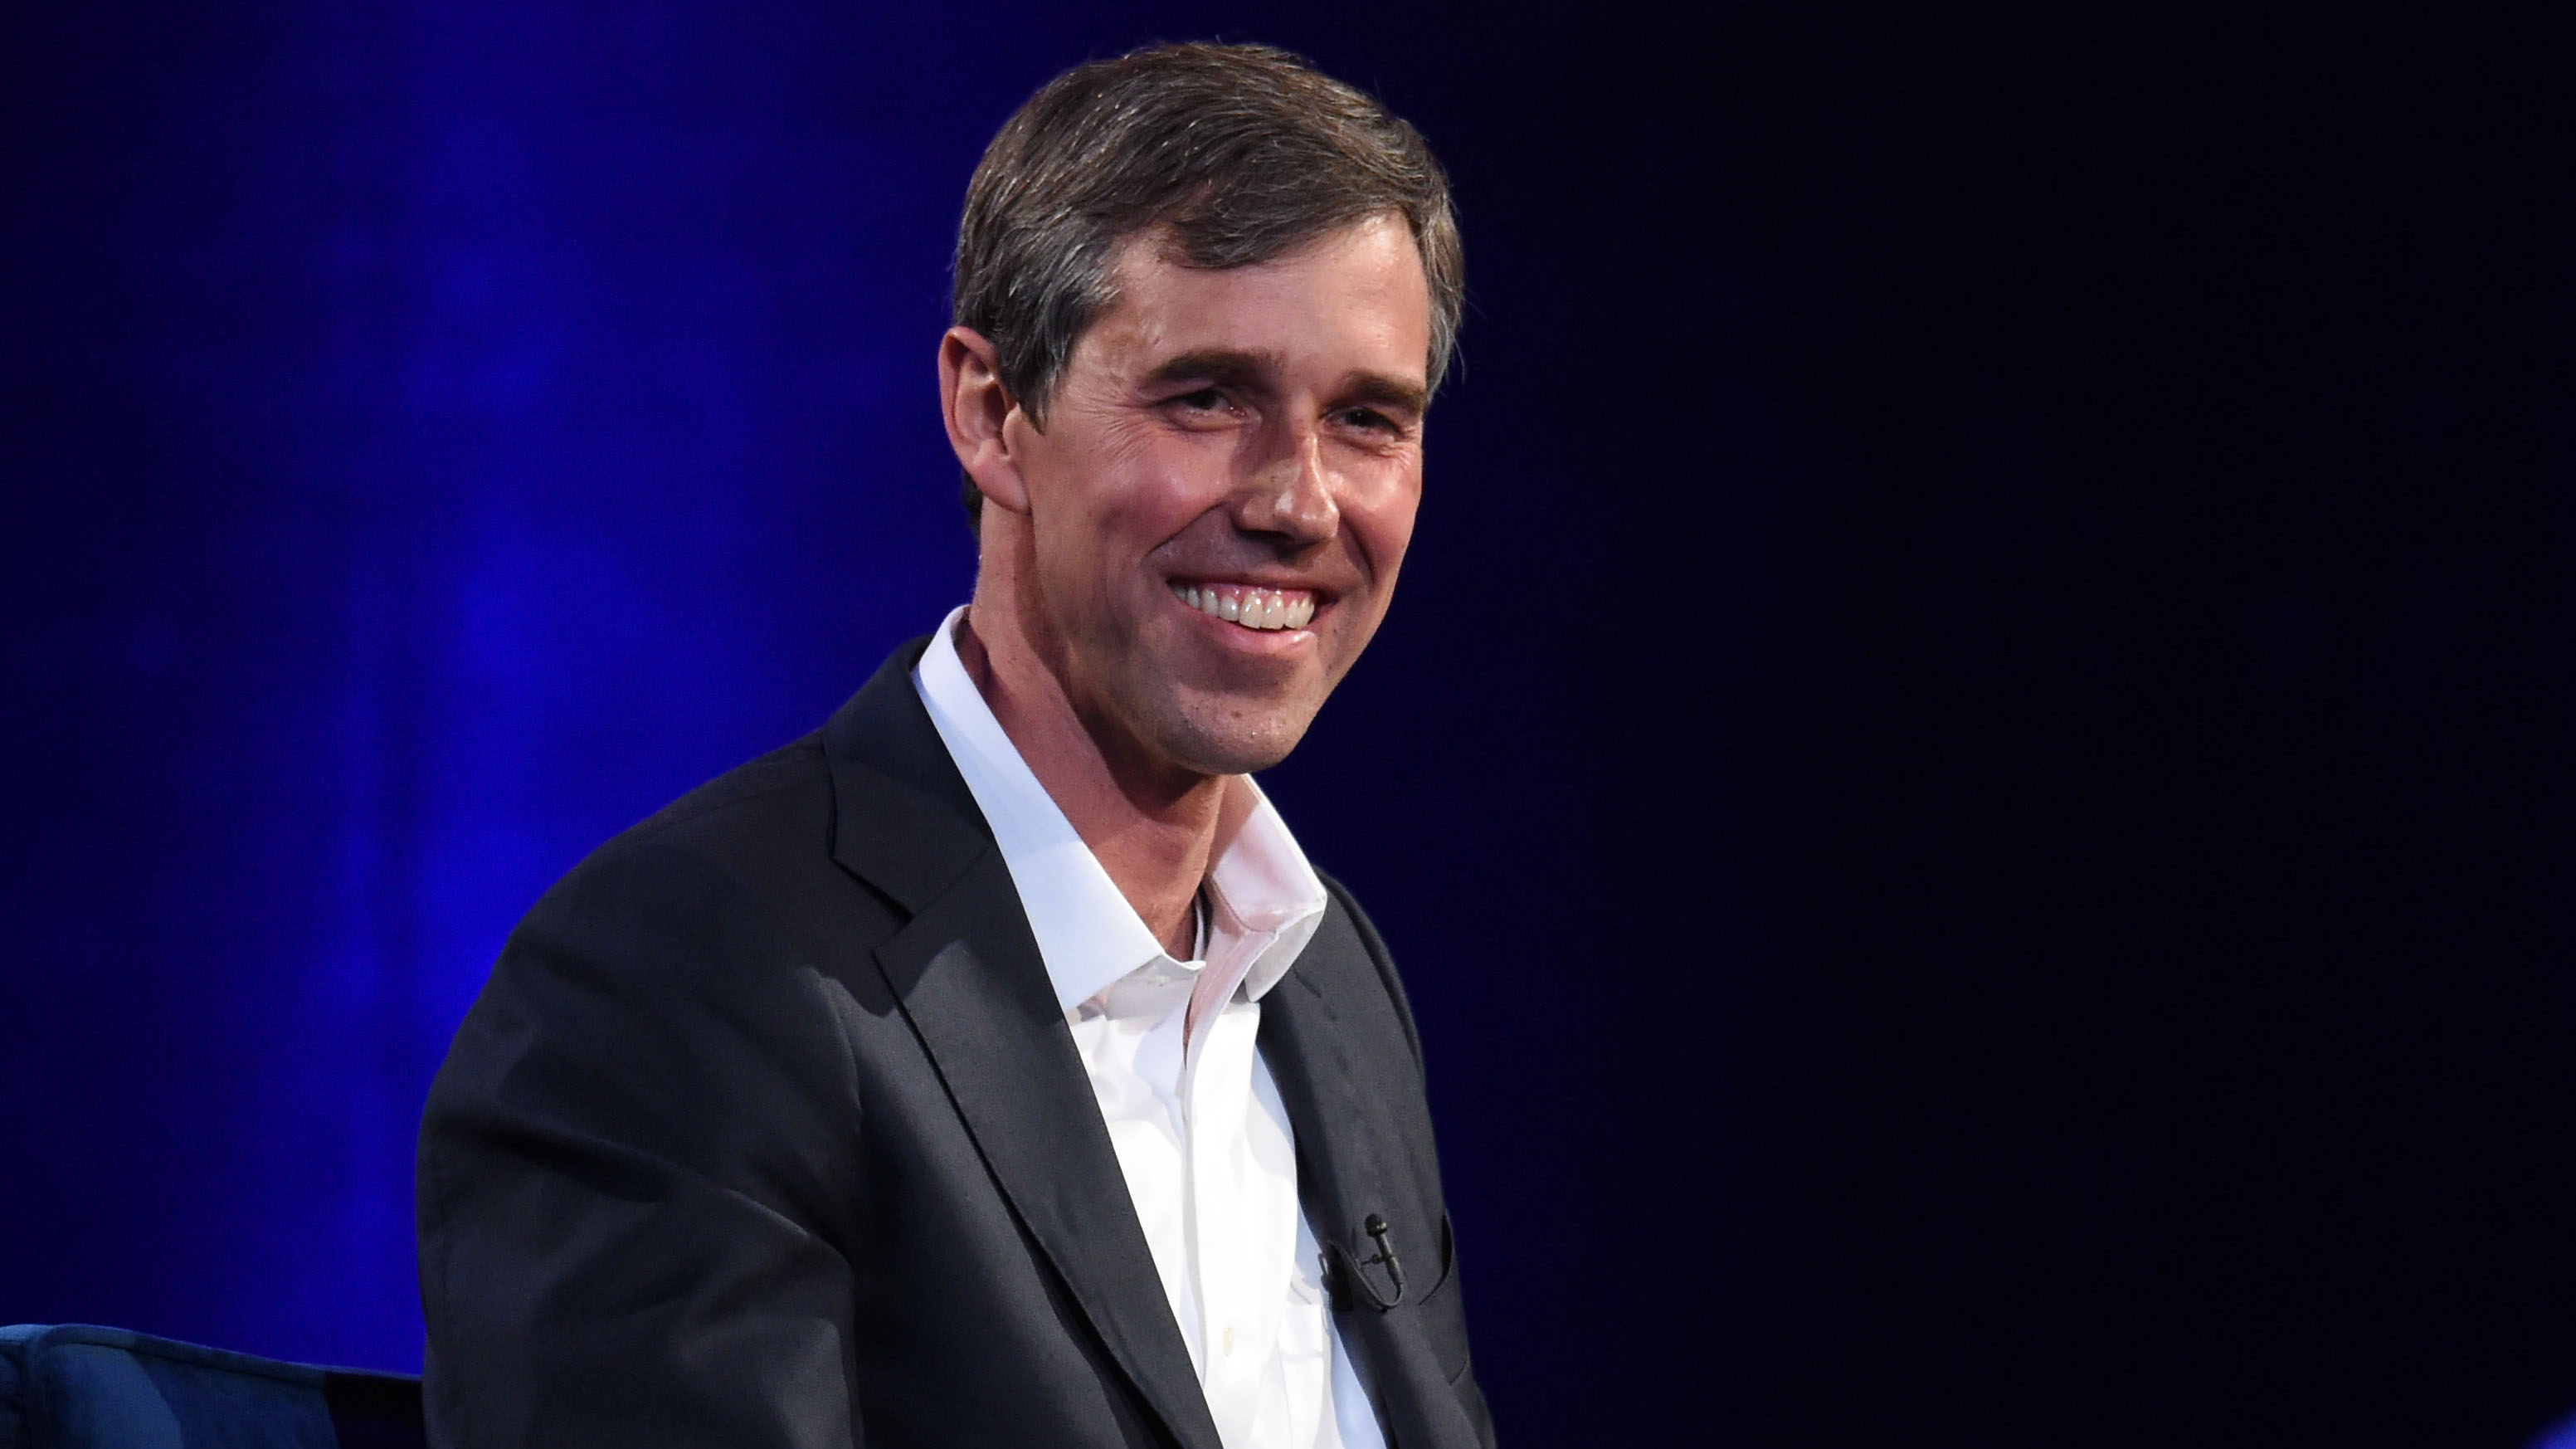 O'Rourke Enters 2020 Presidential Race, Starts Campaigning